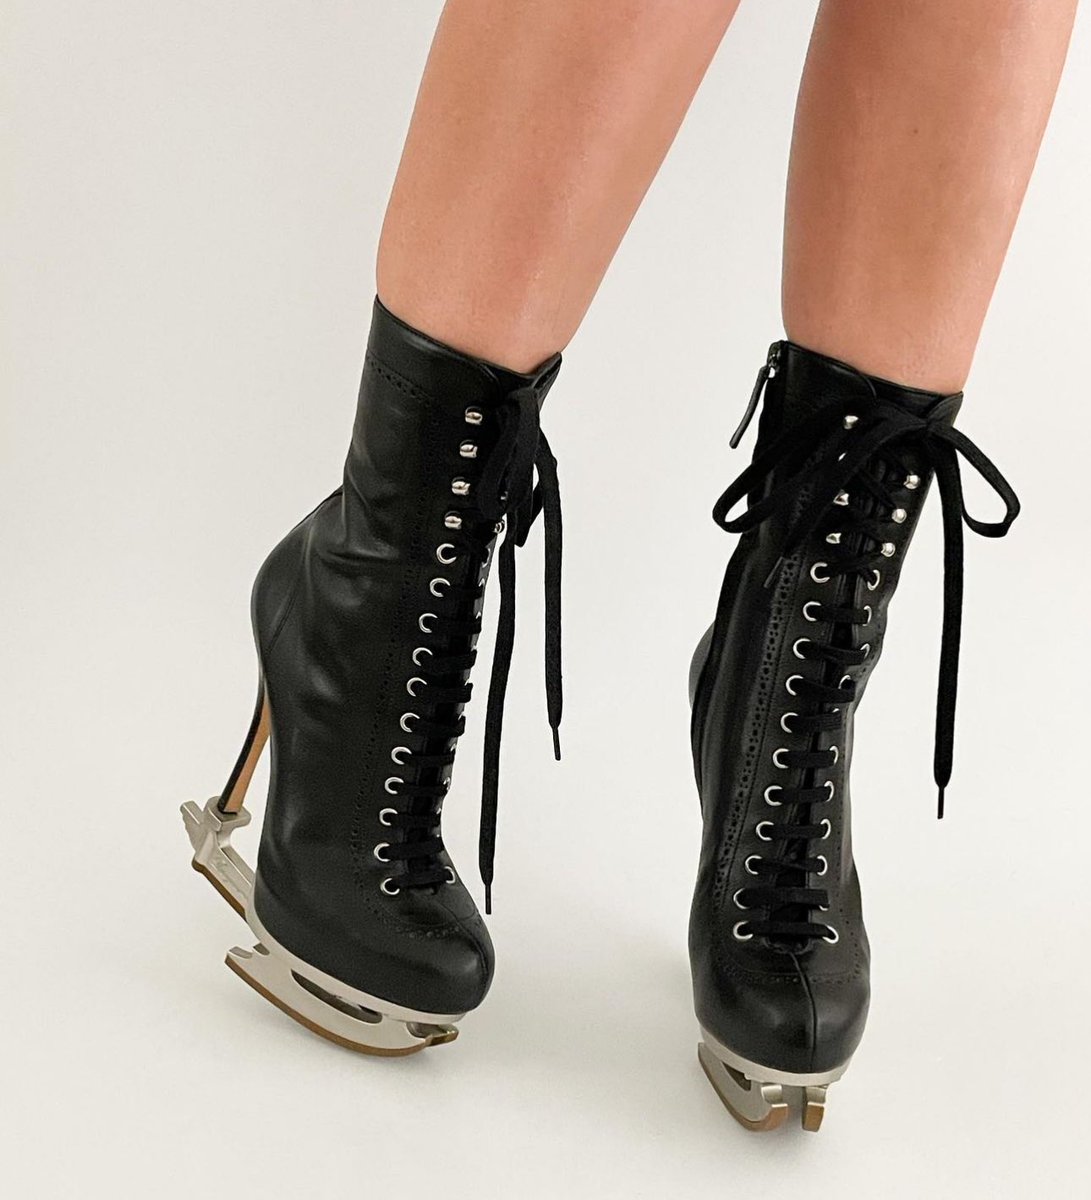 Dsquared’s ‘Skate Moss’ Boots